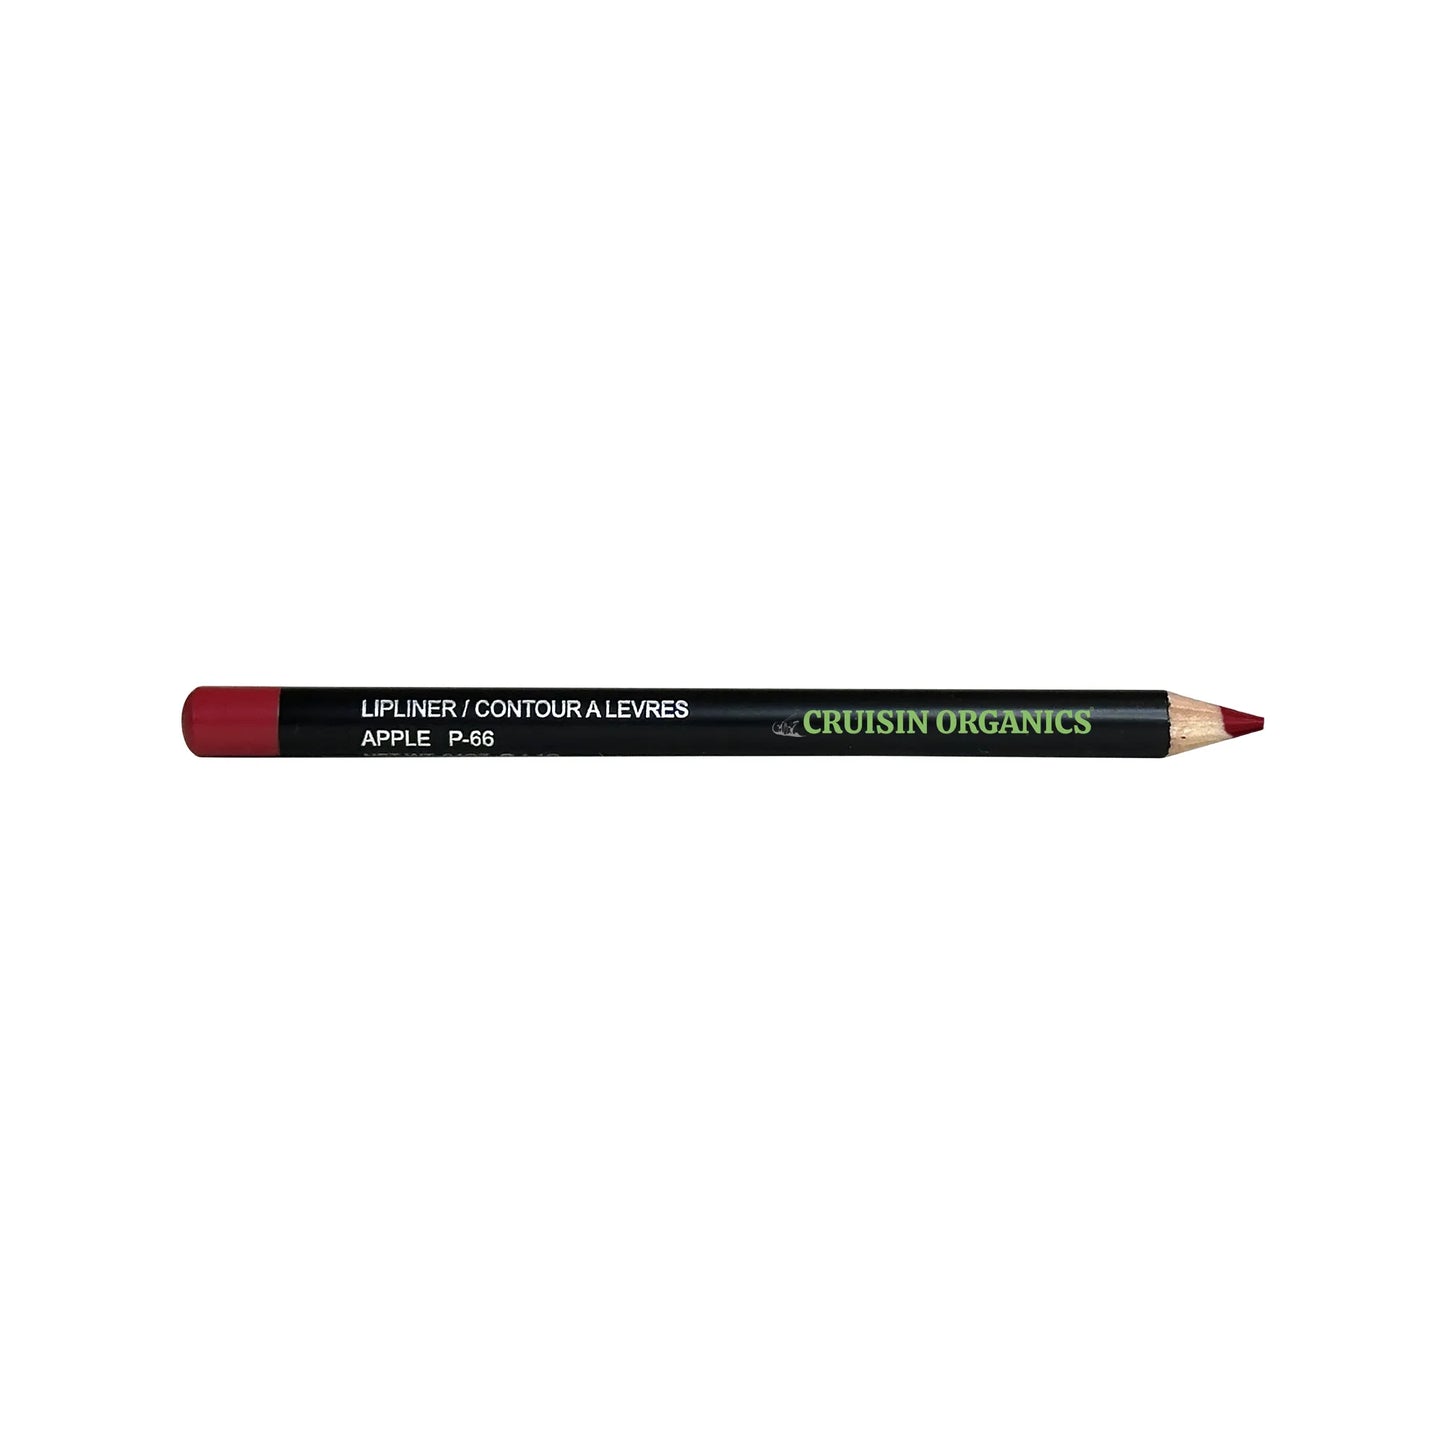 Cruisin Organics' Apple Lip Liner defines and enhances lips with long-lasting color and precision. Made from high-quality ingredients for a flawless finish.